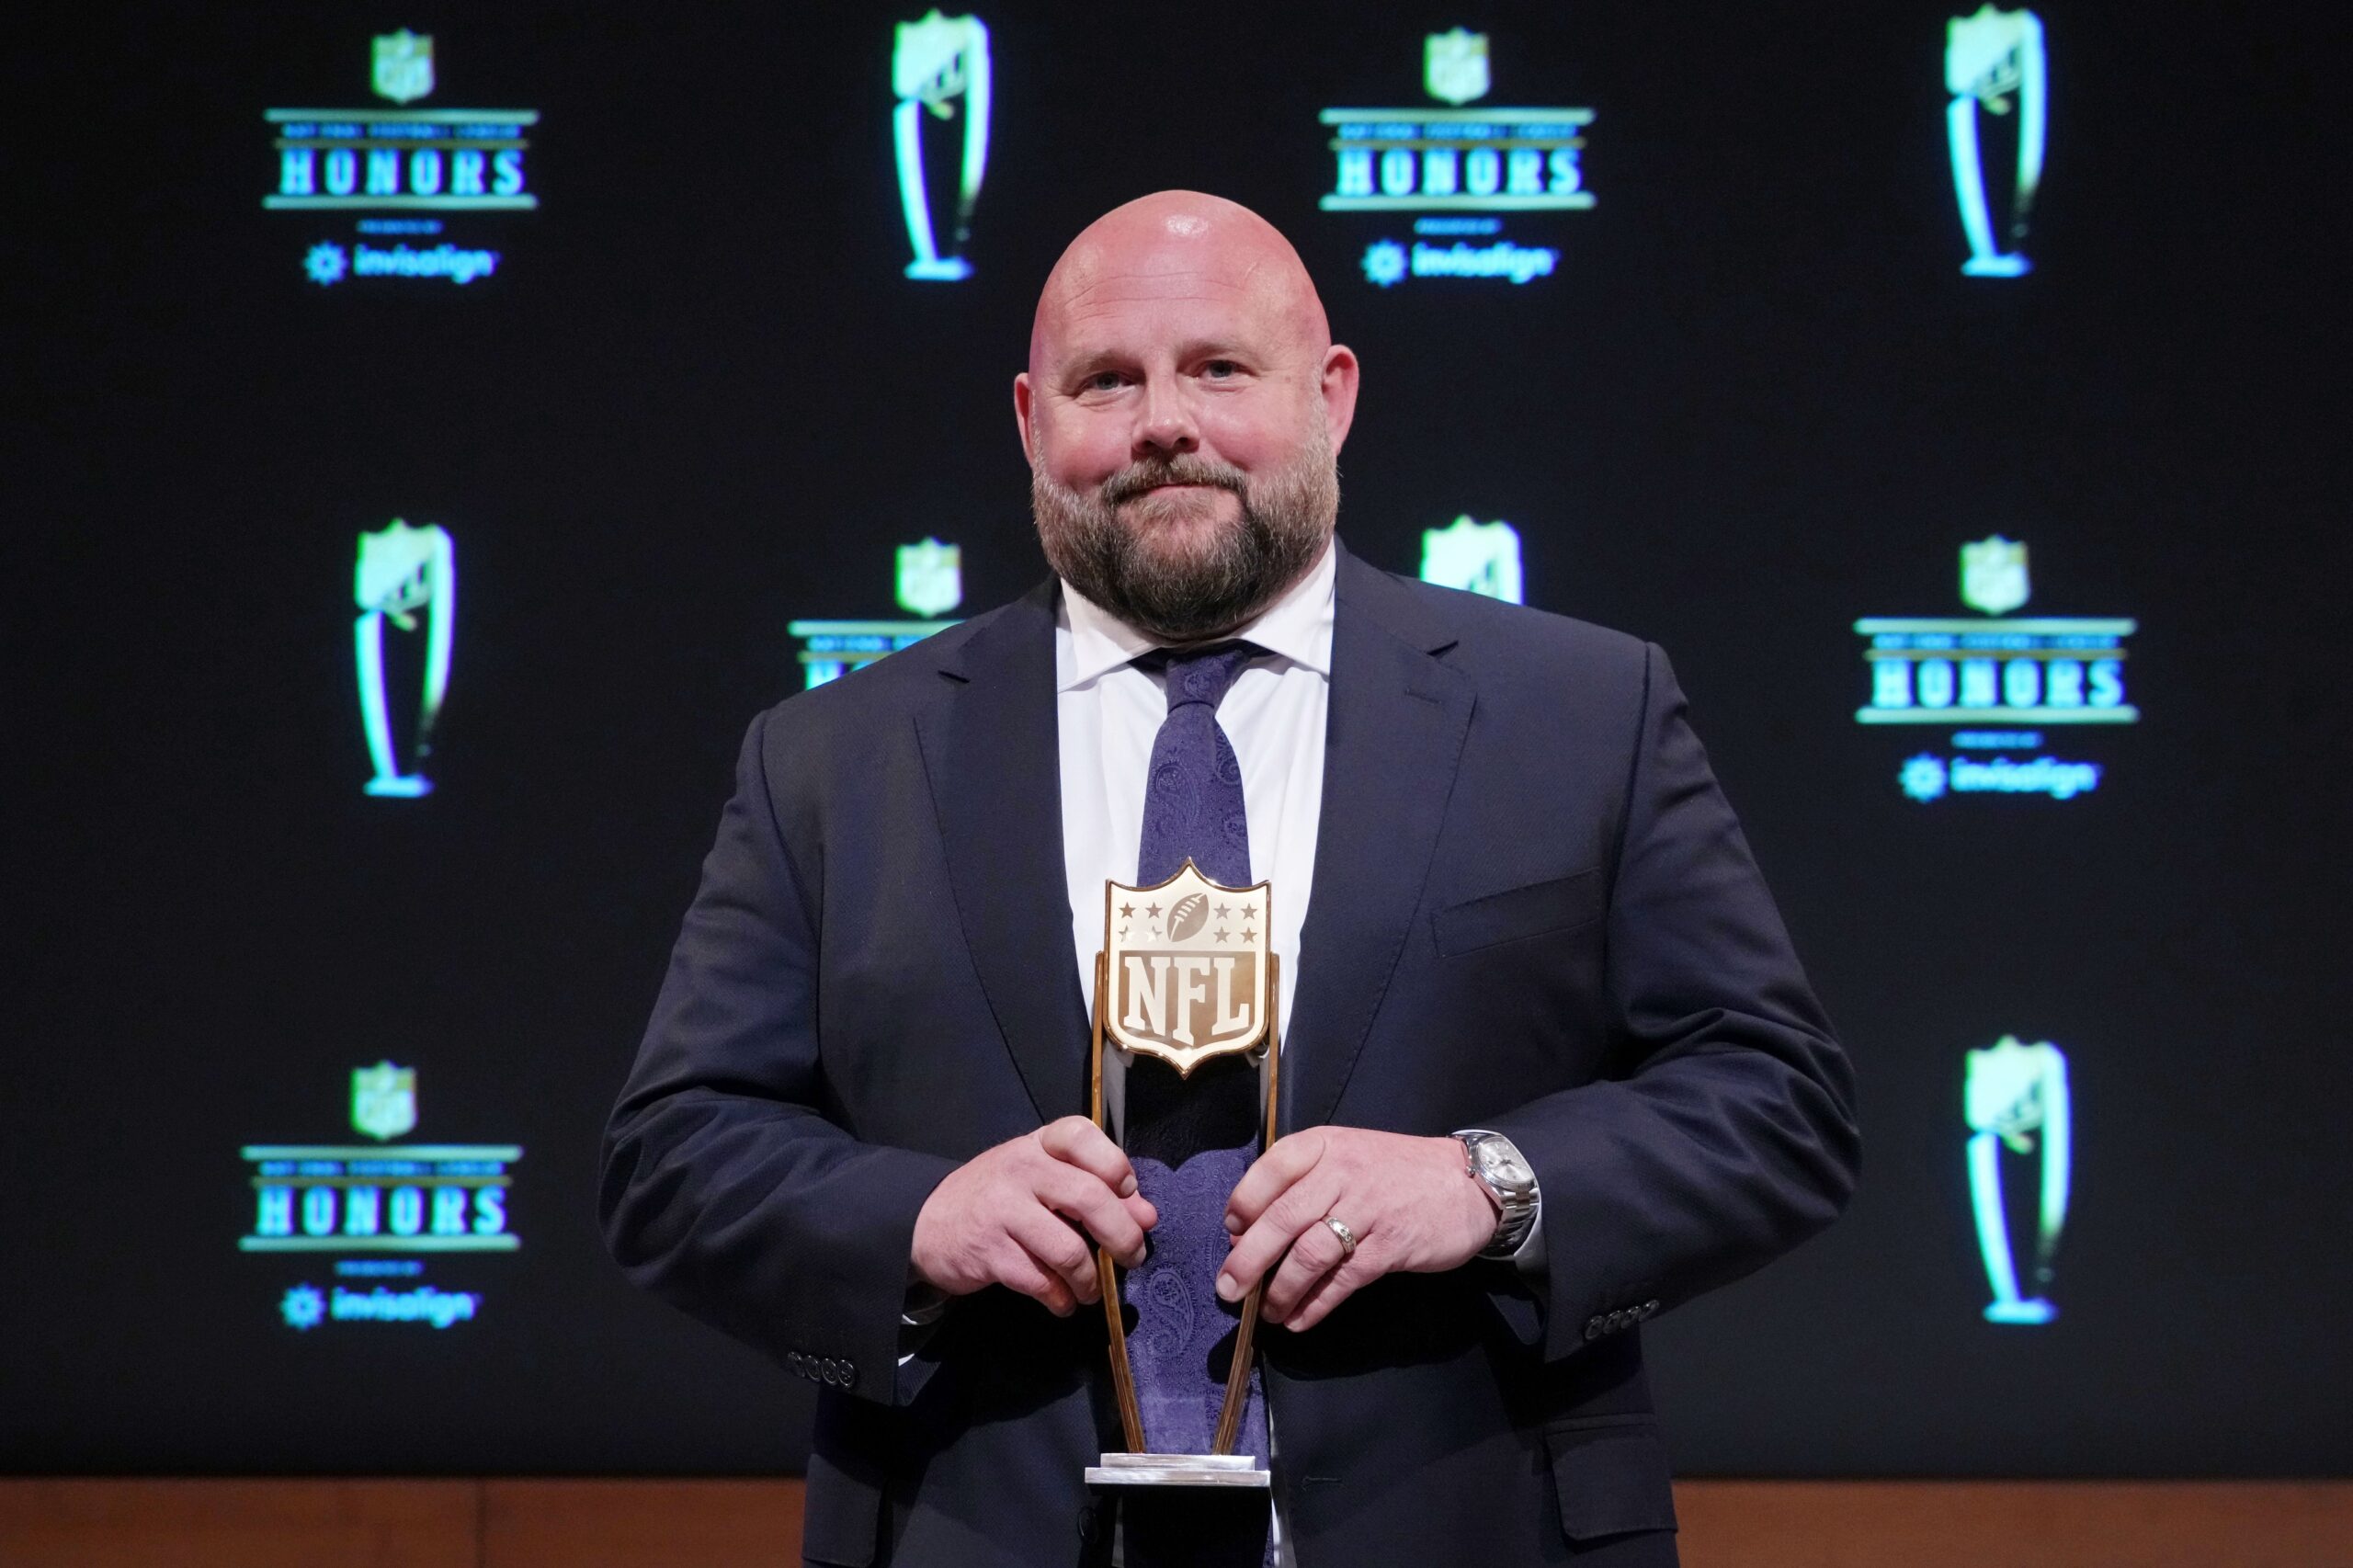 New York Giants head coach Brian Daboll poses for a photo after receiving the award for AP Coach of the Year during the NFL Honors award show at Symphony Hall.